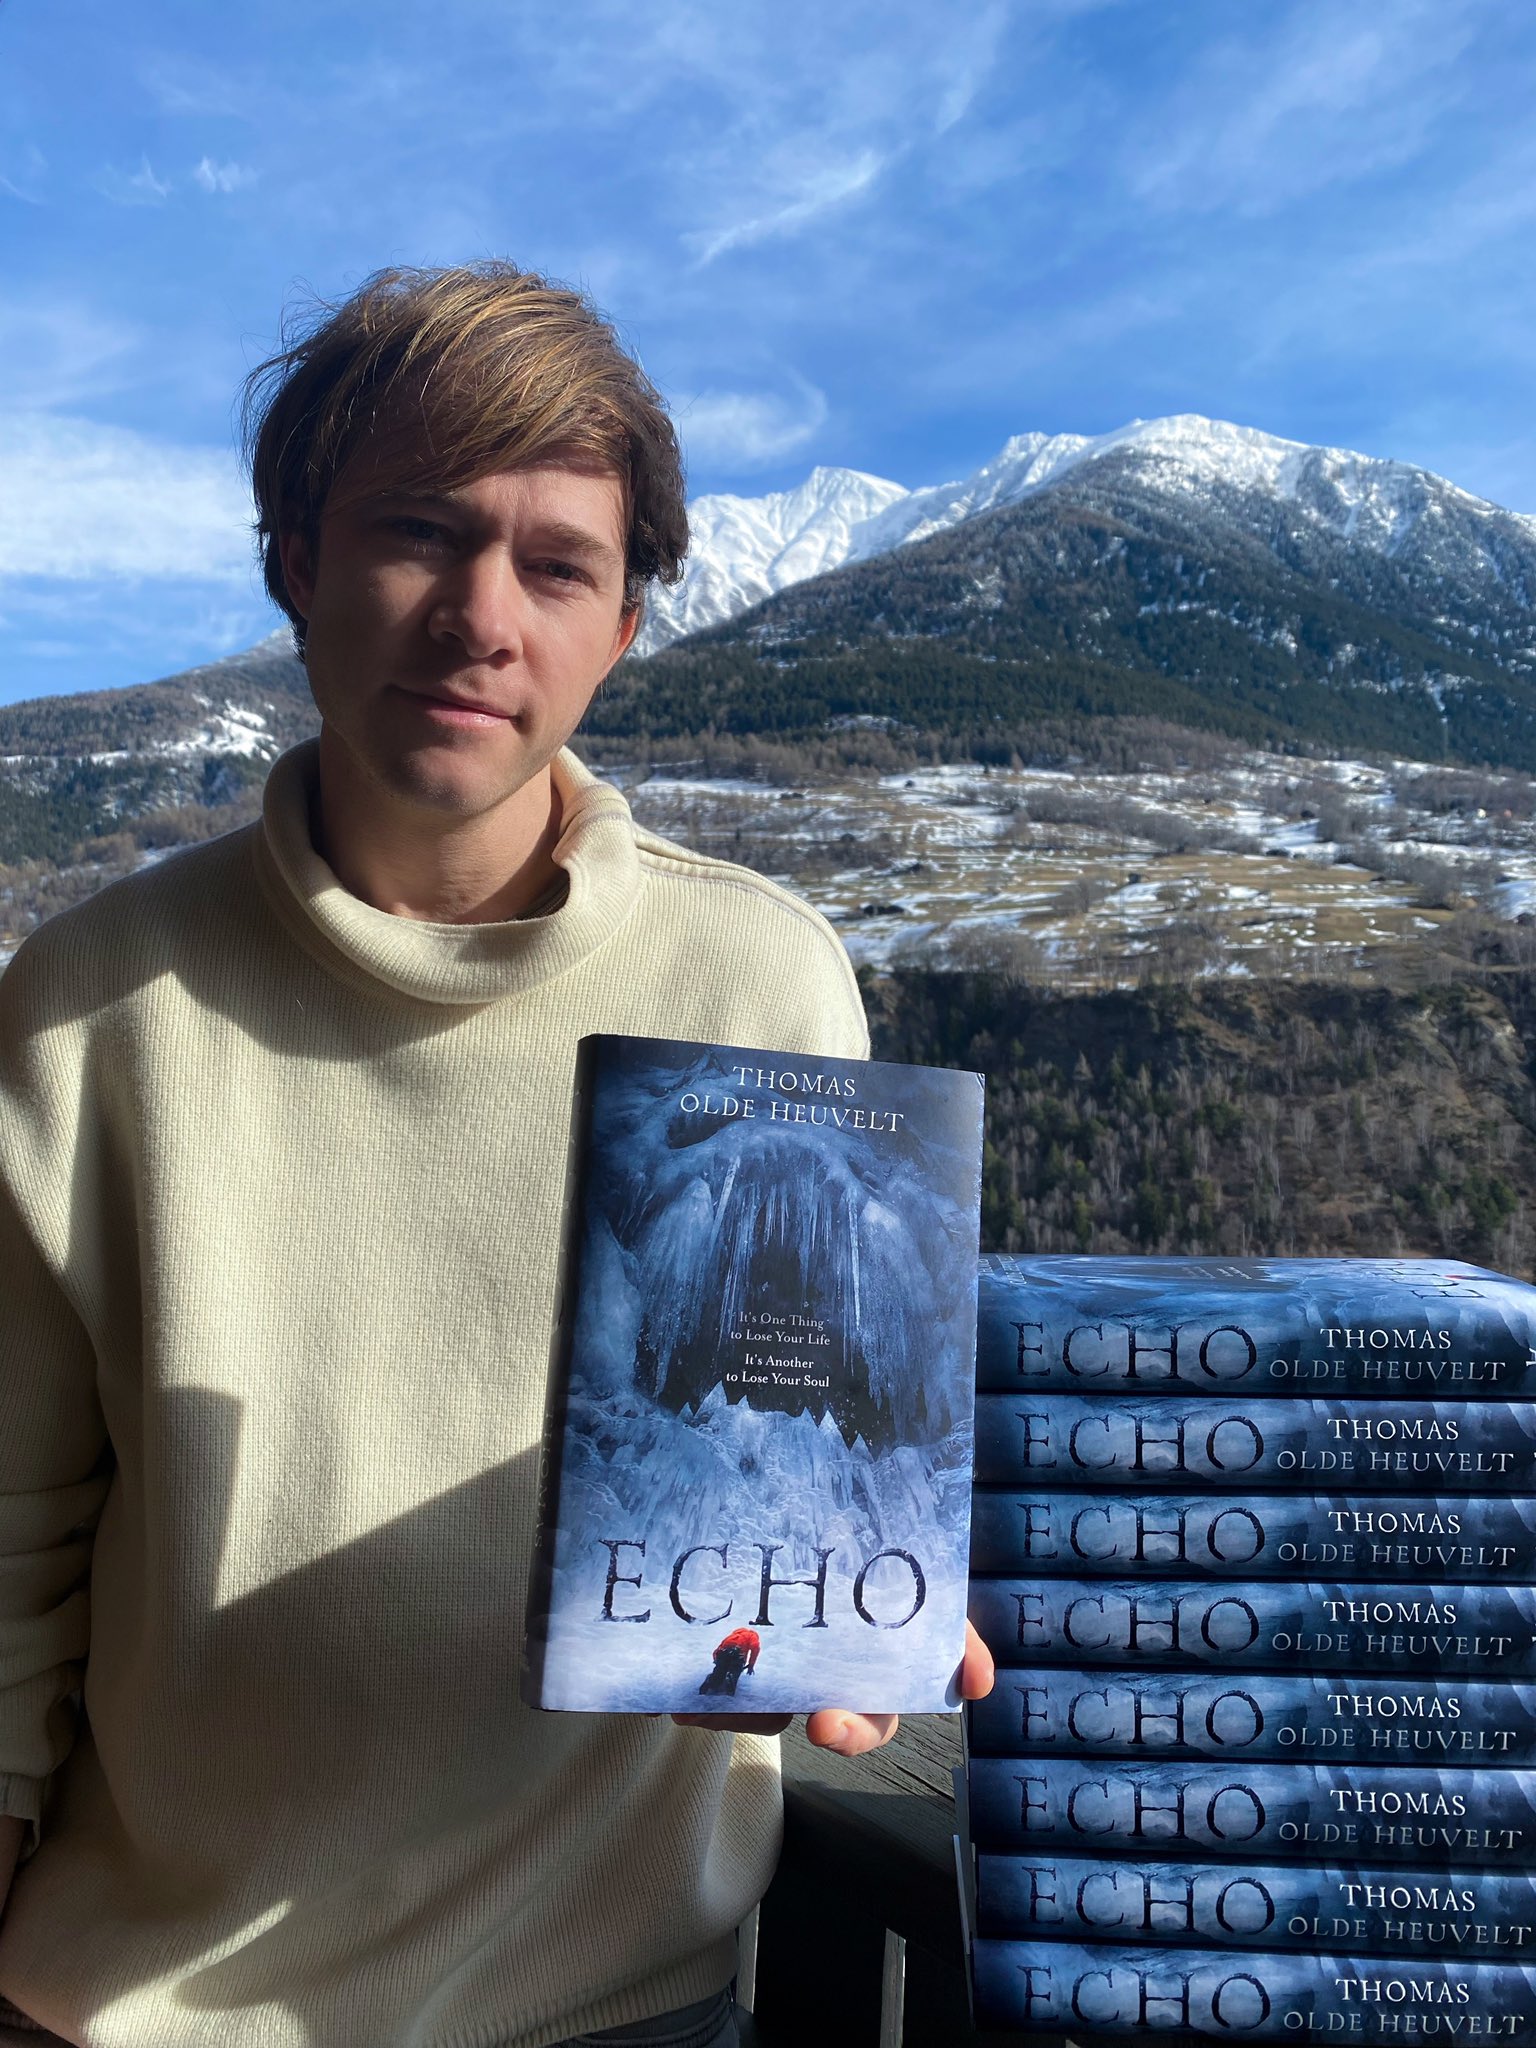 Thomas Olde Heuvelt on Twitter: "TODAY, ECHO is released by @HodderBooks in 🇬🇧, 🏴󠁧󠁢󠁥󠁮󠁧󠁿, 🏴󠁧󠁢󠁳󠁣󠁴󠁿, 🏴󠁧󠁢󠁷󠁬󠁳󠁿, 🇮🇪, 🇳🇿, and 🇦🇺! I am tremendously proud of this edition, beautifully translated by @MosheGilula. ECHO